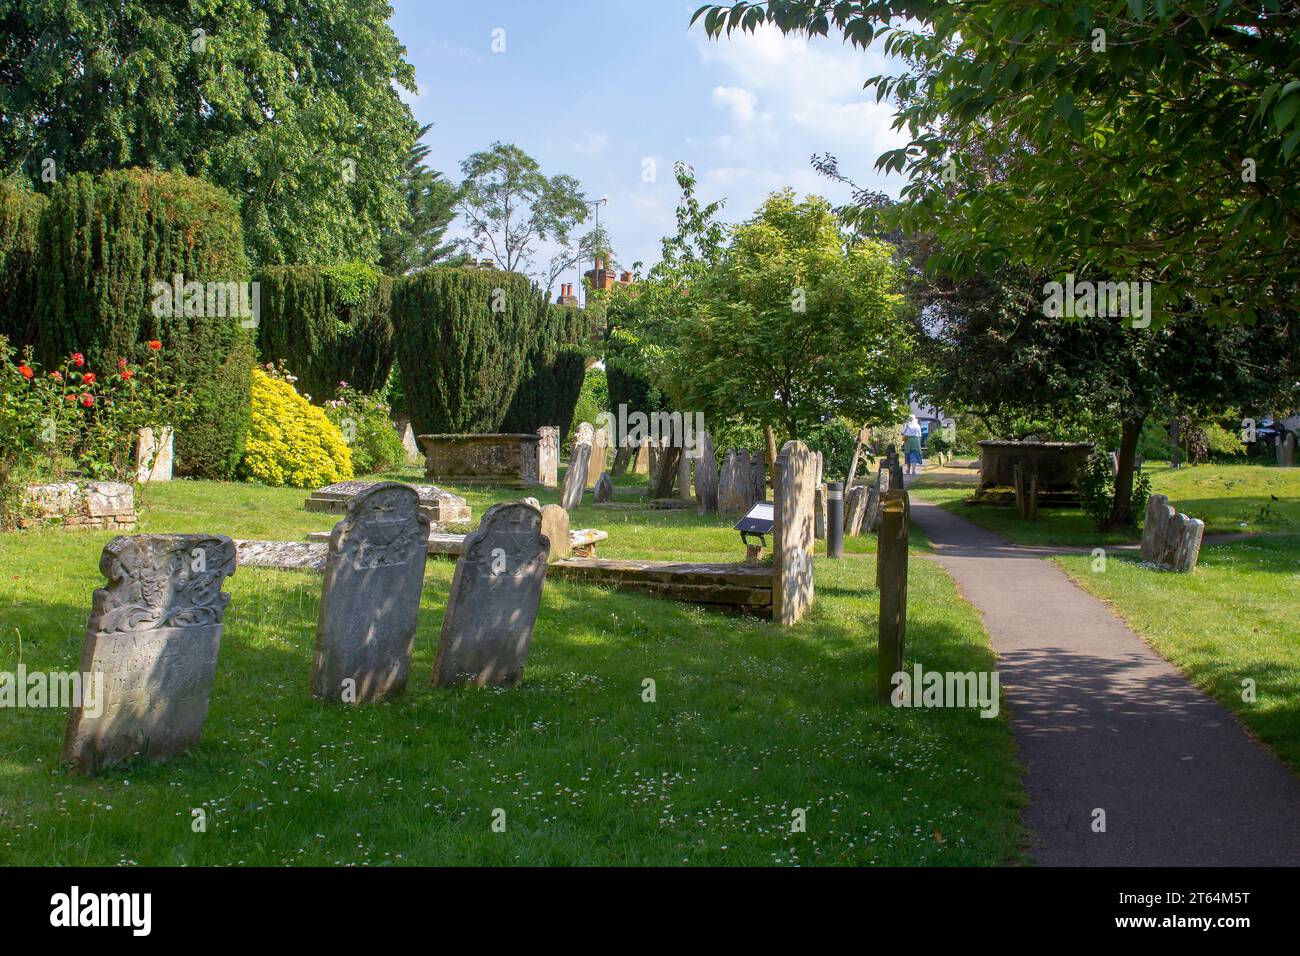 14 June 2023 The beautiful old cemetary with ancient headstones in the grounds of Holy Trinity C of E church in Cookham village, Berkshire England Stock Photo